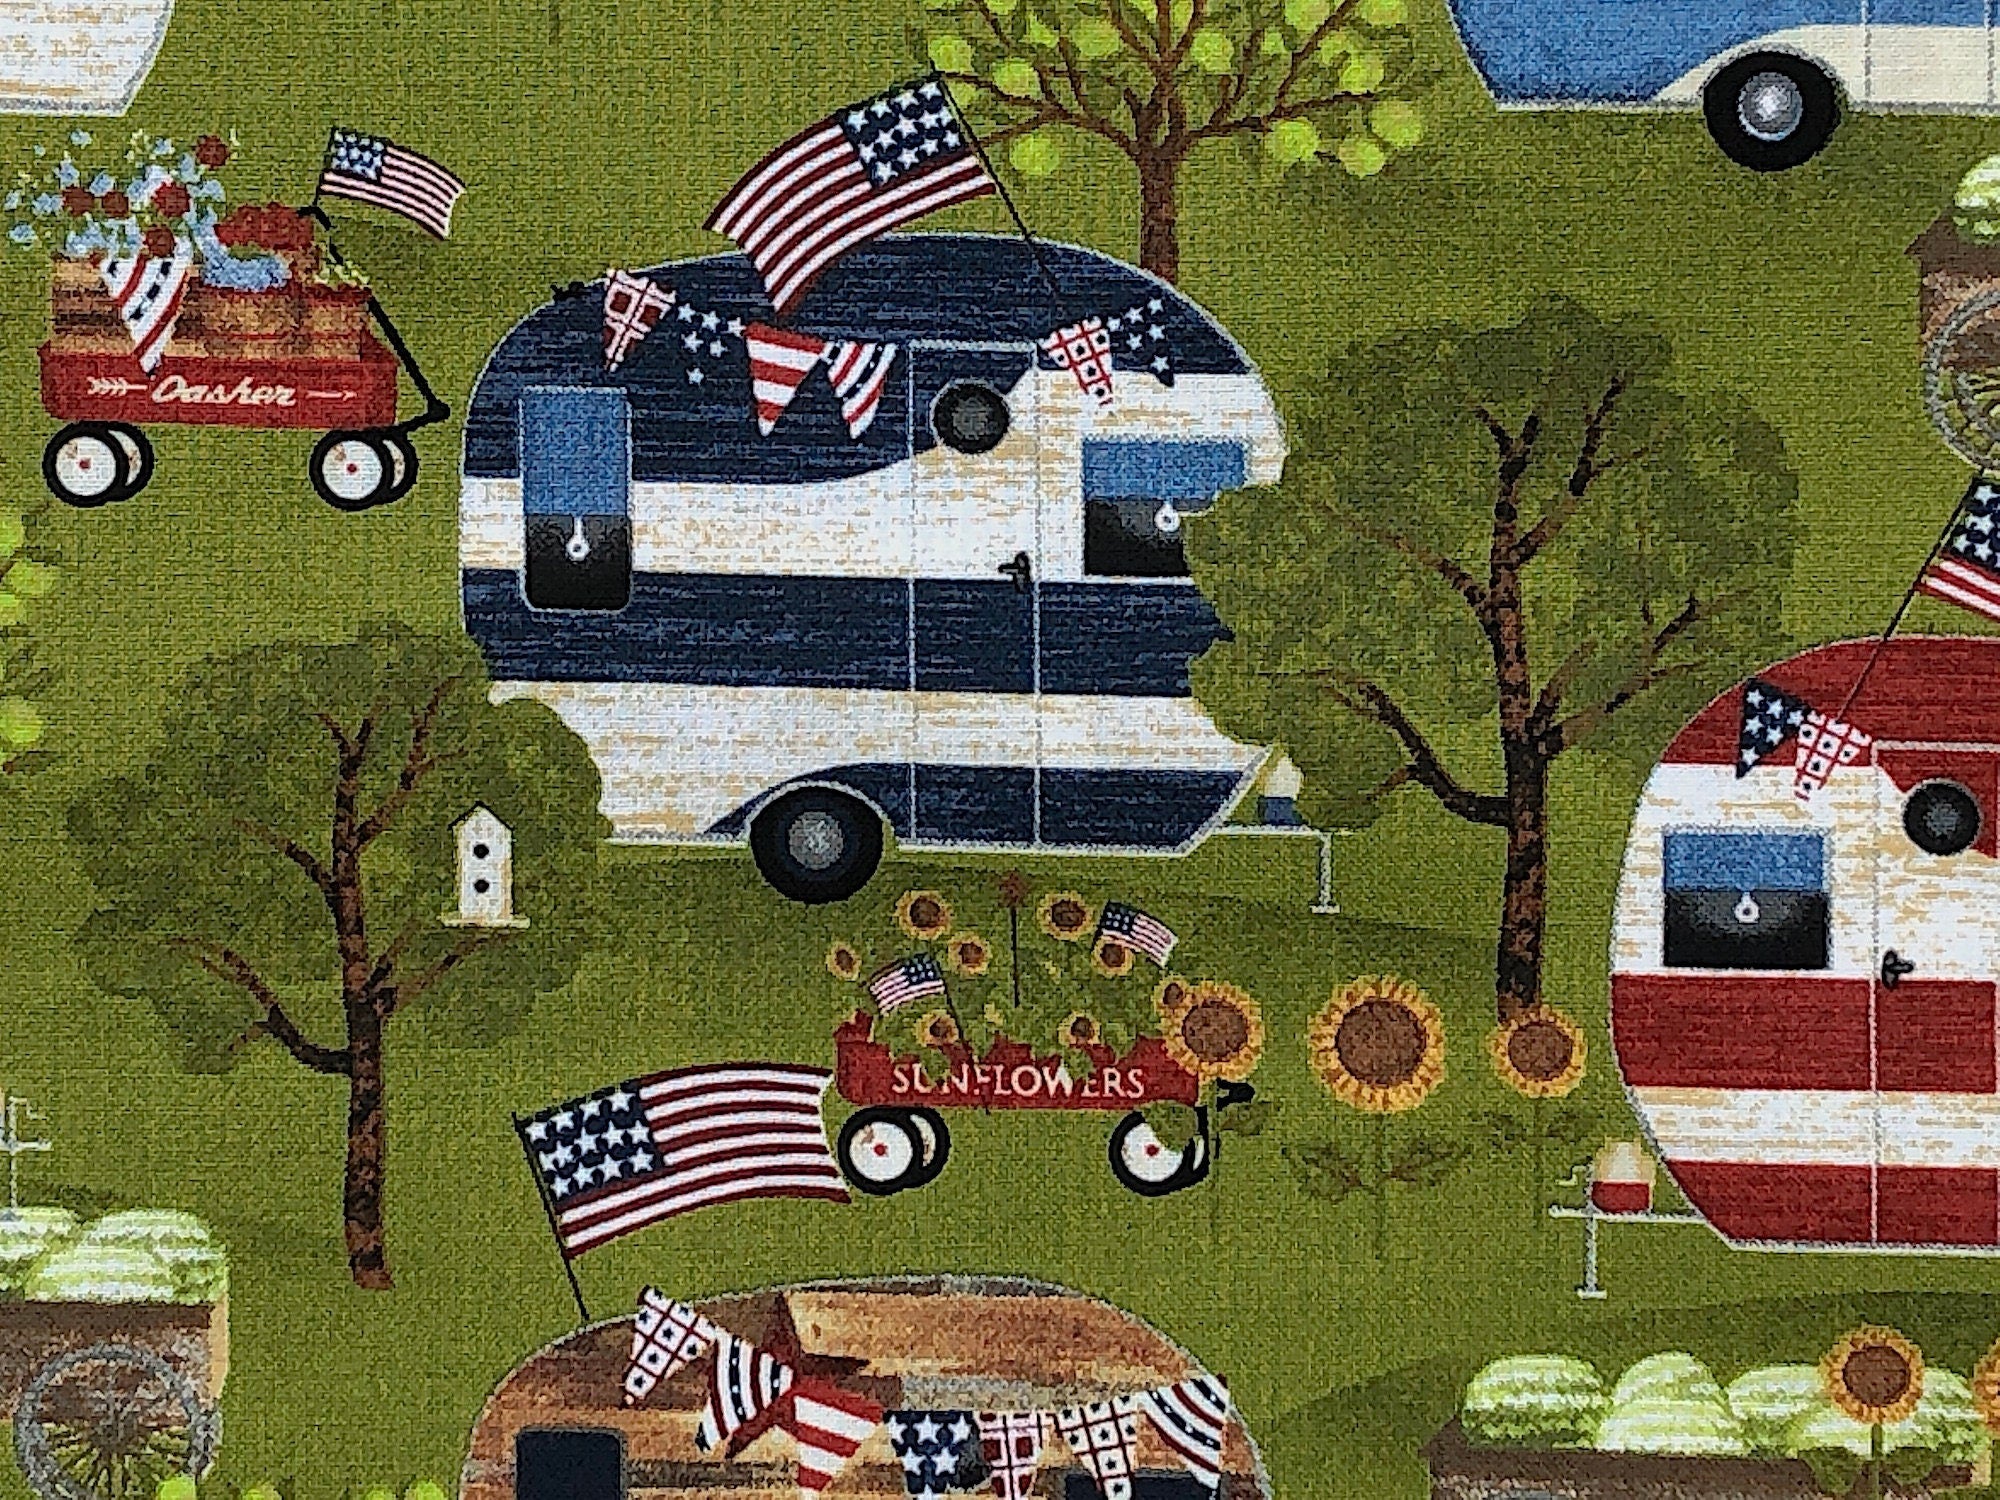 Close u of blue and white travel trailer, trees, USA Flag, sunflowers and more.